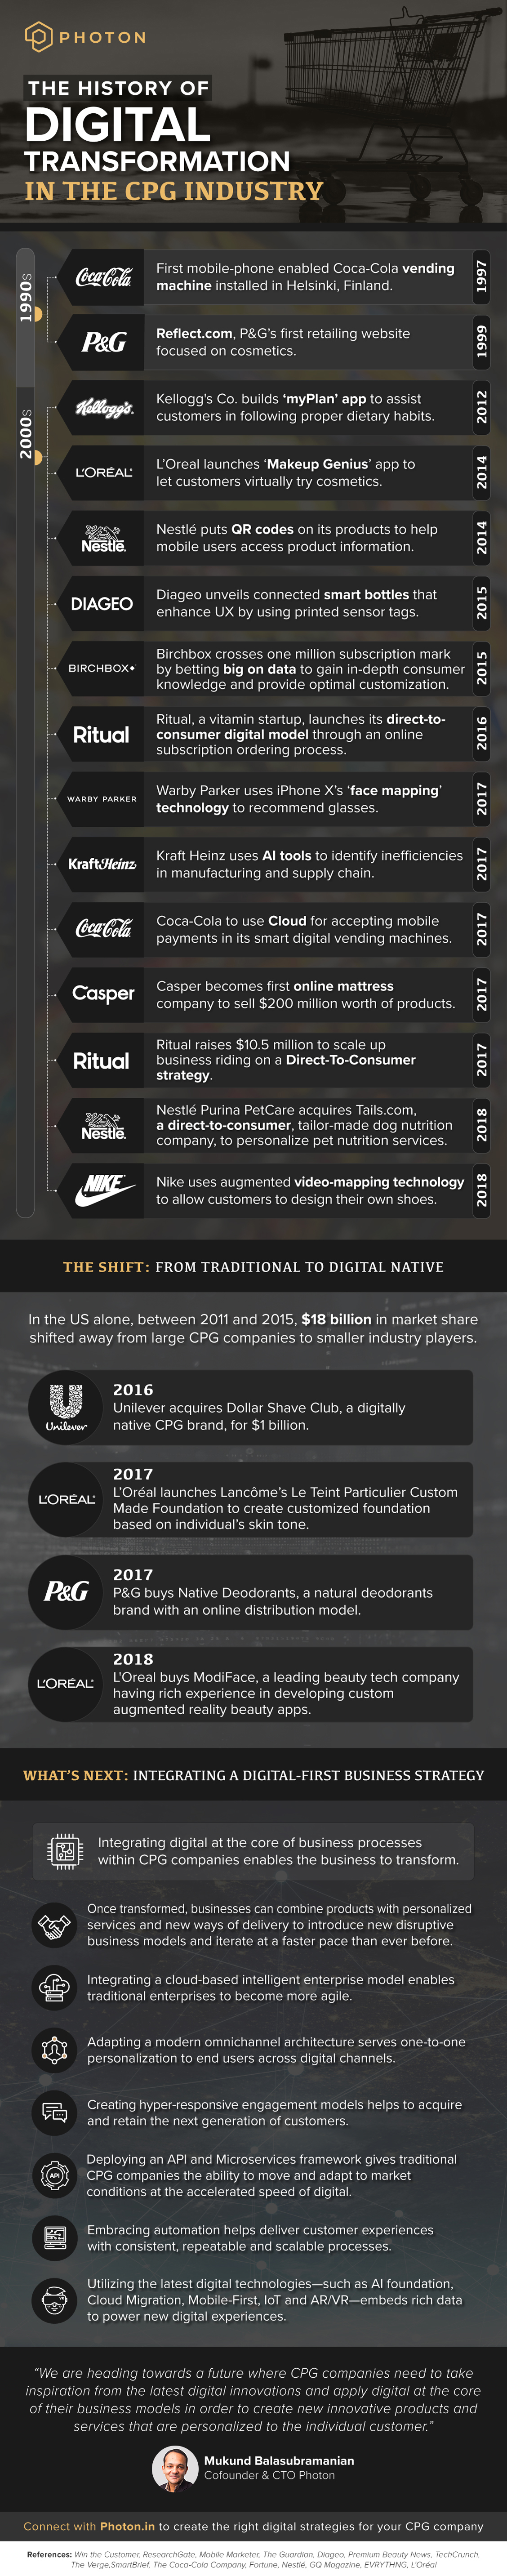 The history of digital transformation in the CPG industry